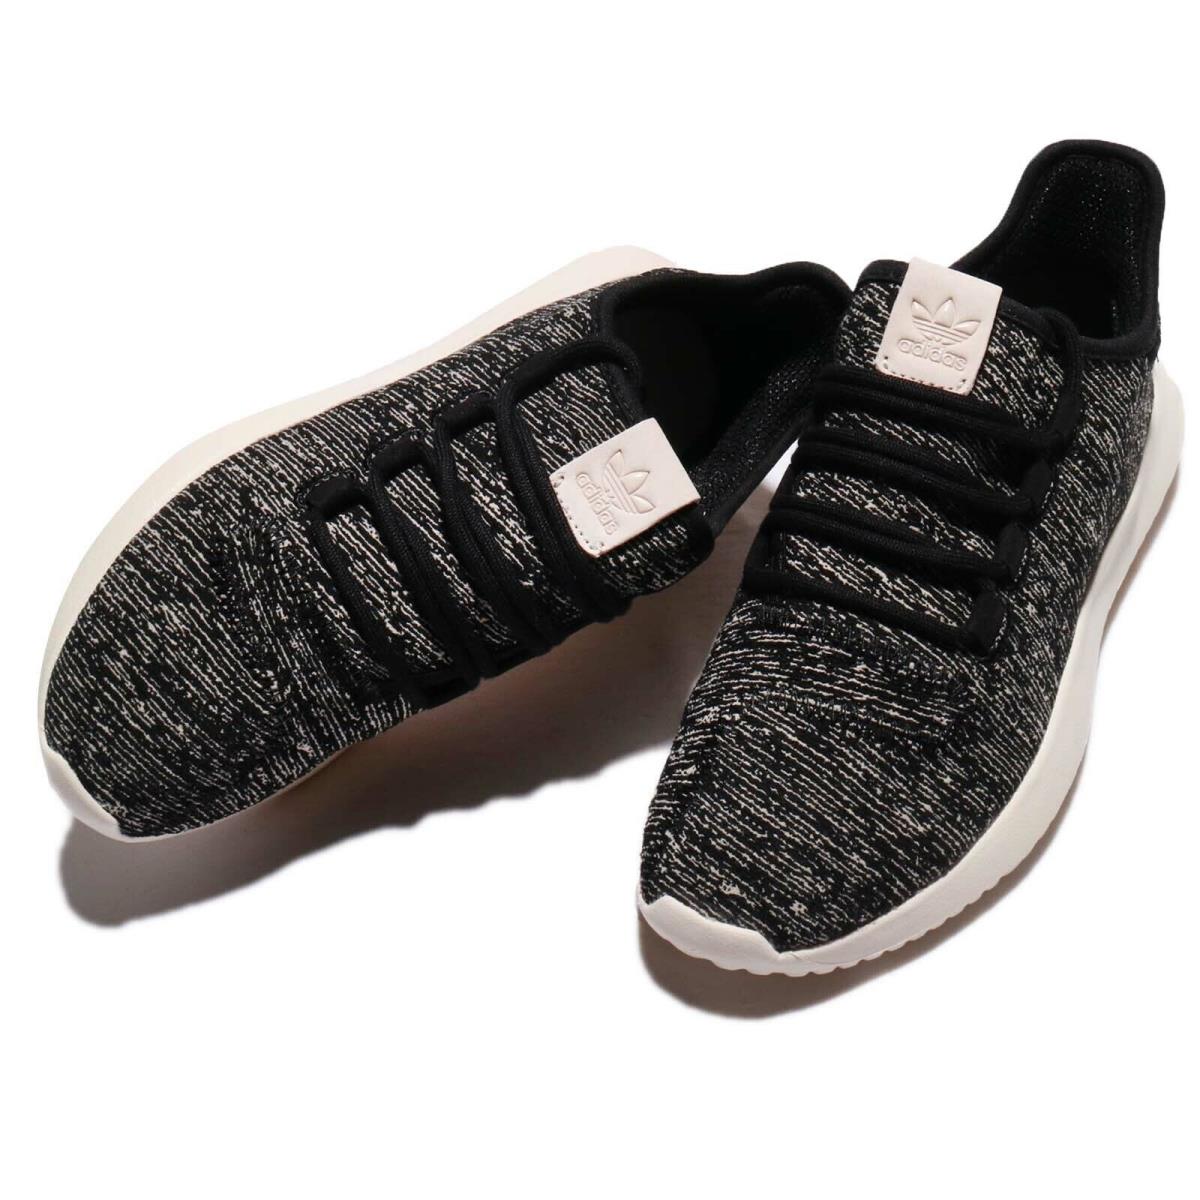 Adidas shoes tubular shadow - Black/Clear Brown/Off White 0